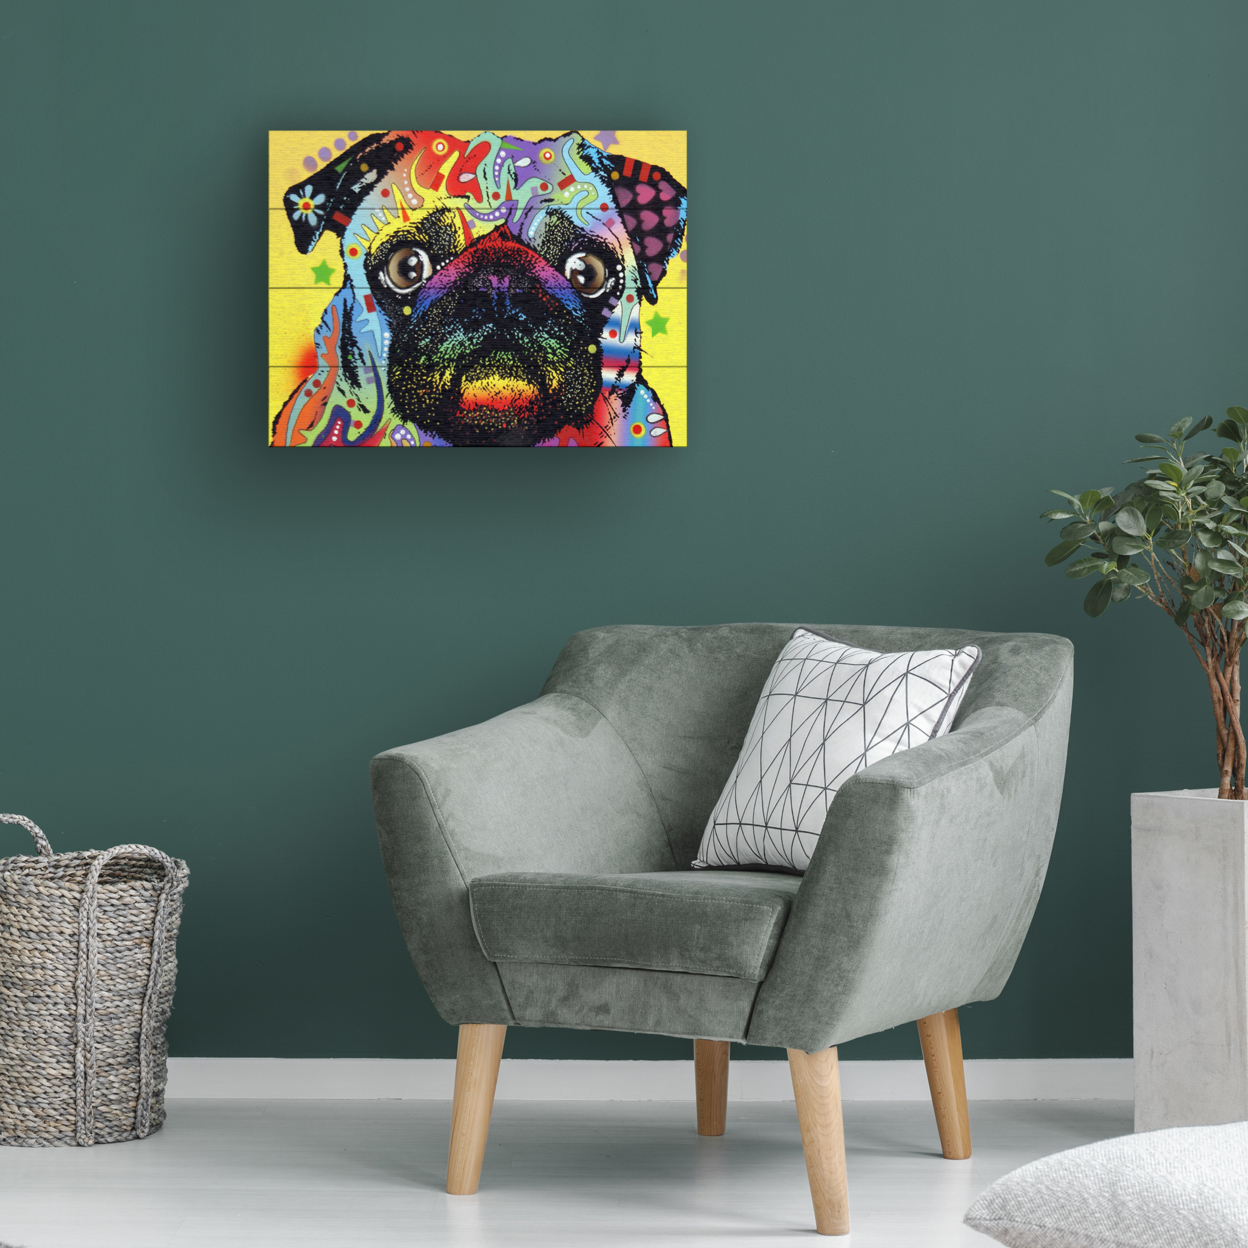 Wall Art 12 X 16 Inches Titled Pug Ready To Hang Printed On Wooden Planks